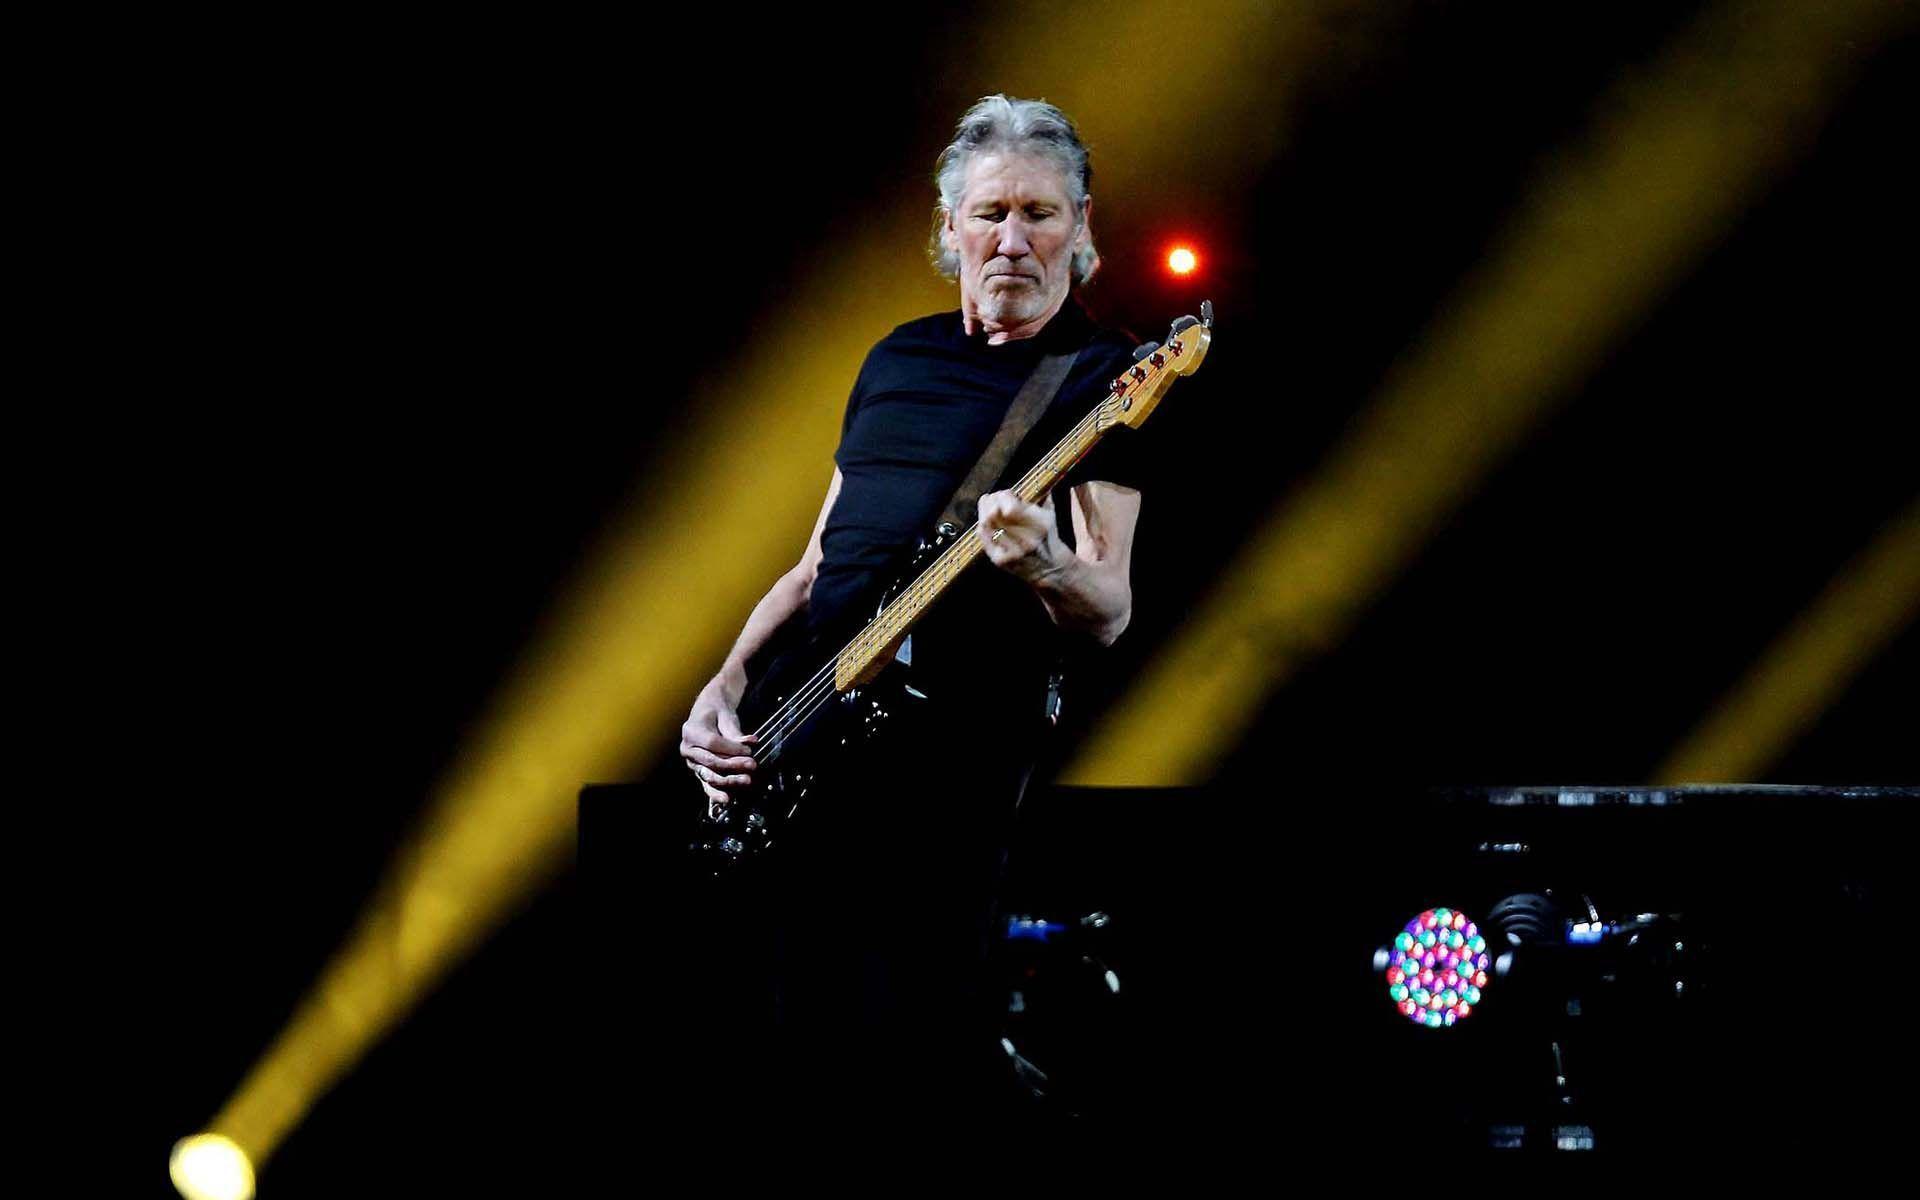 Pink Floyd To Release First New Album ('Endless River') in 20